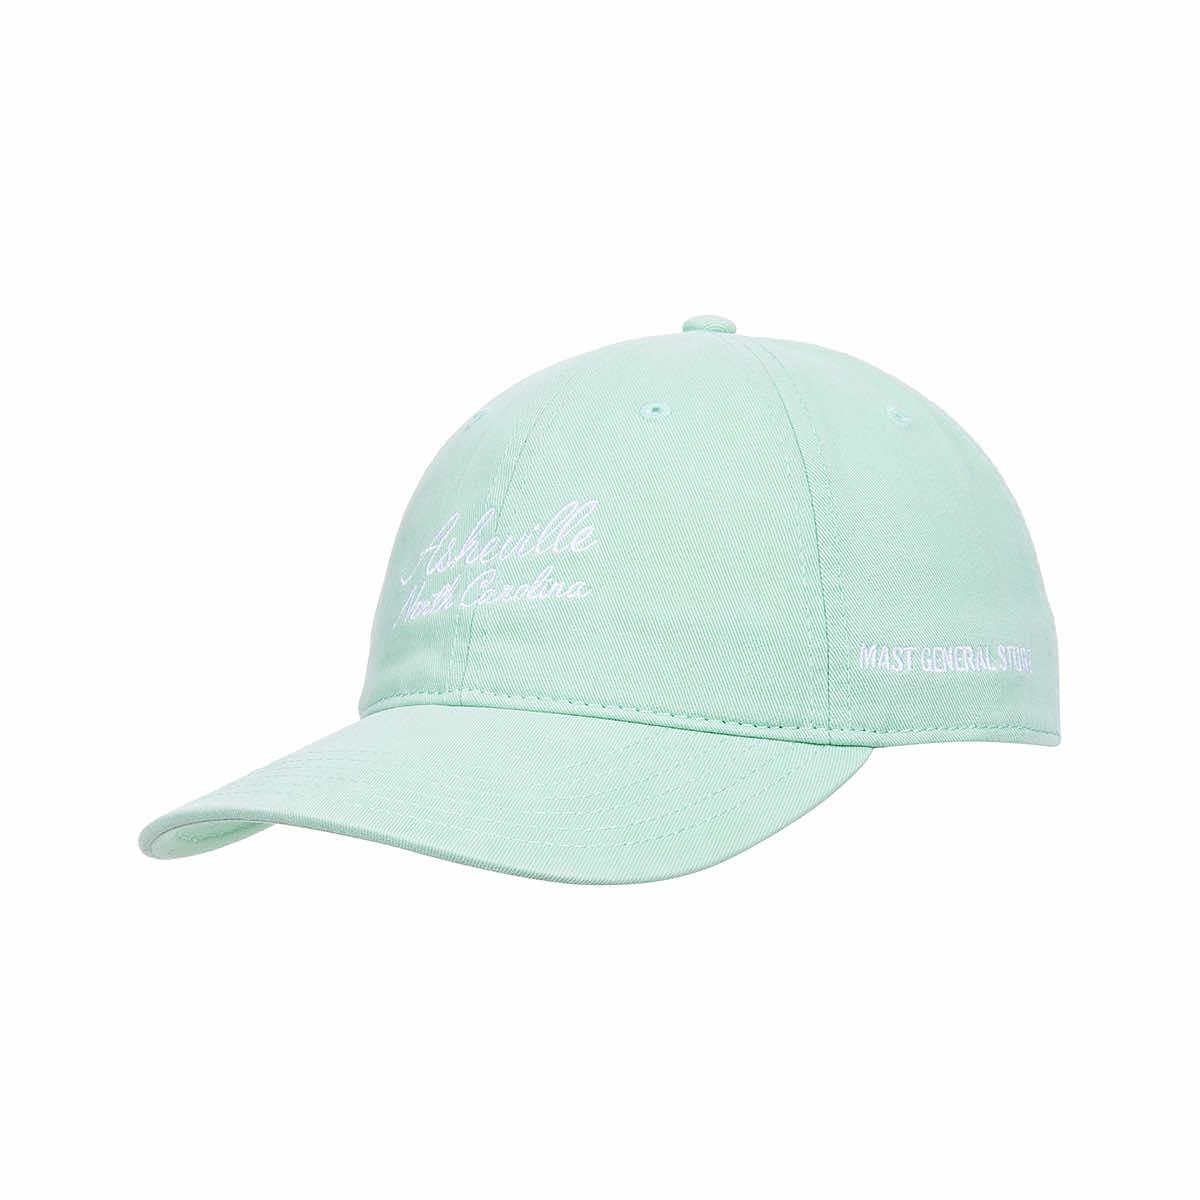 Mast General Store Asheville Embroidered Script Hat